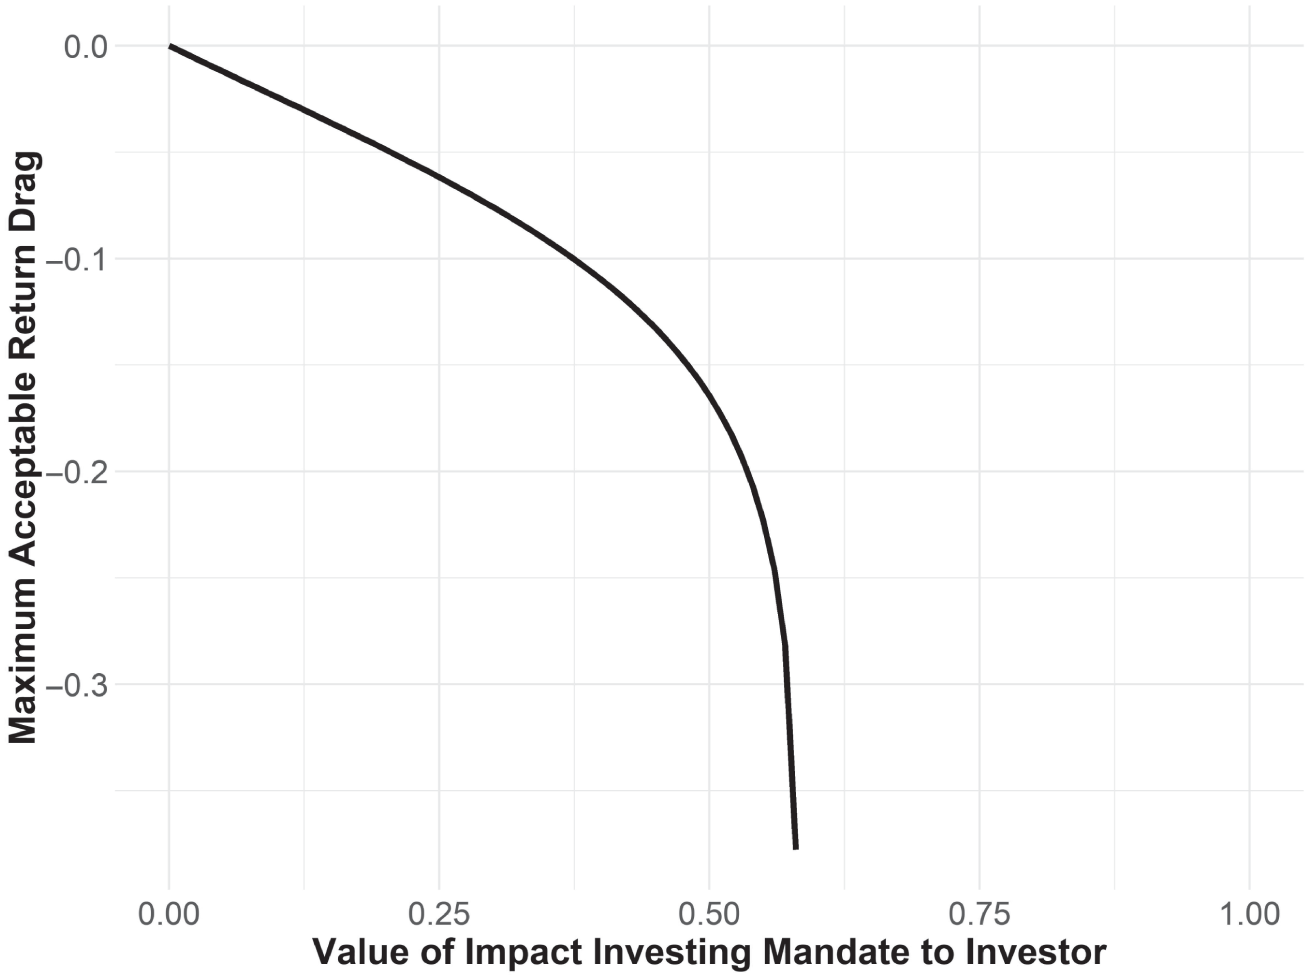 Schematic illustration of Maximum Acceptable Return Drag, as a Function of Mandate's Relative Value Where required return is 6%, expected portfolio return is 8%, and expected portfolio volatility is 6%.